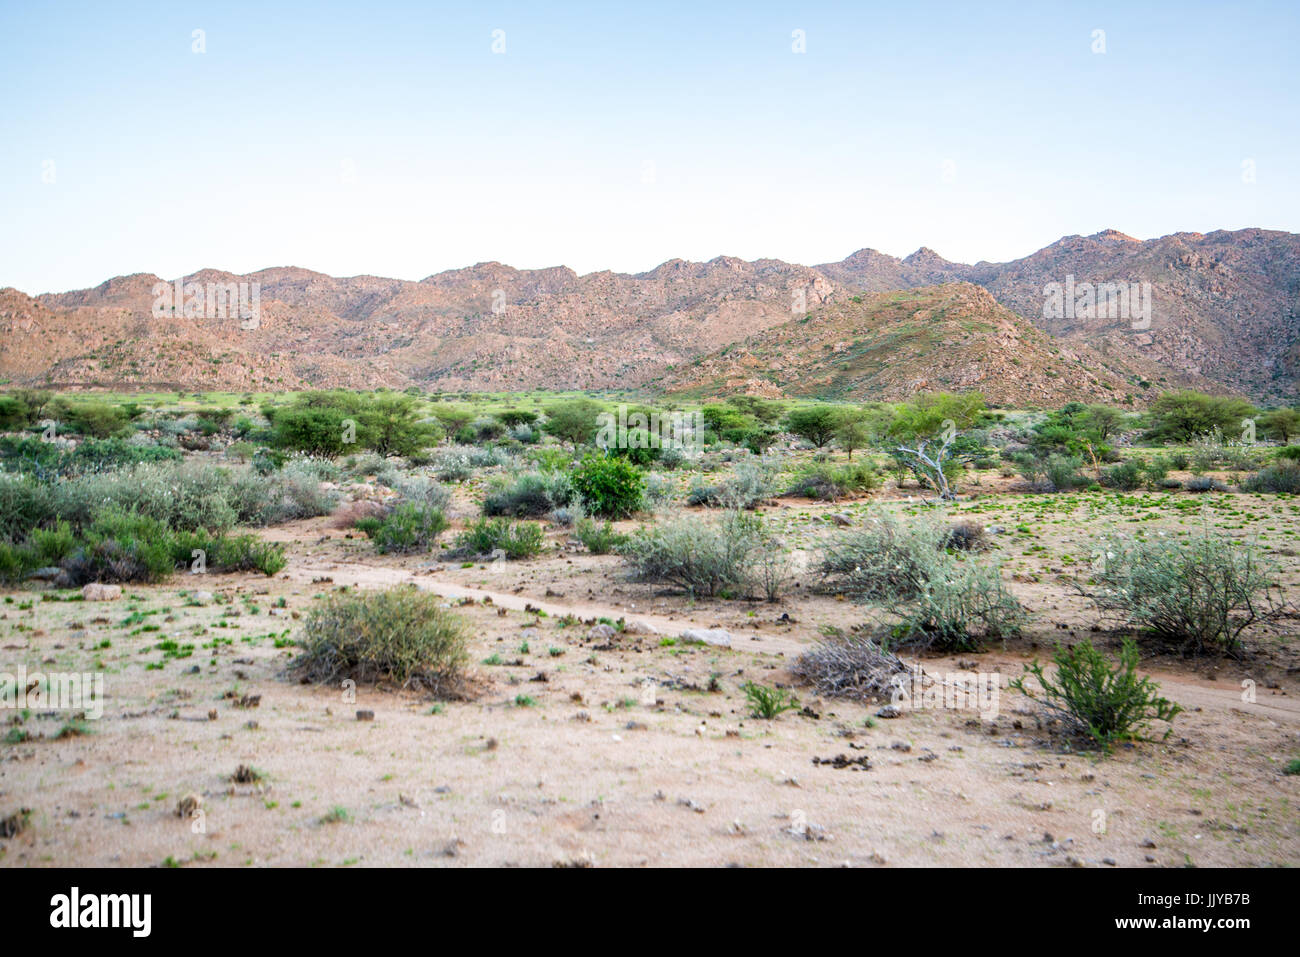 Small shrubs and bushes growing in the Namib-Naukluft desert in Namibia, Africa. Stock Photo